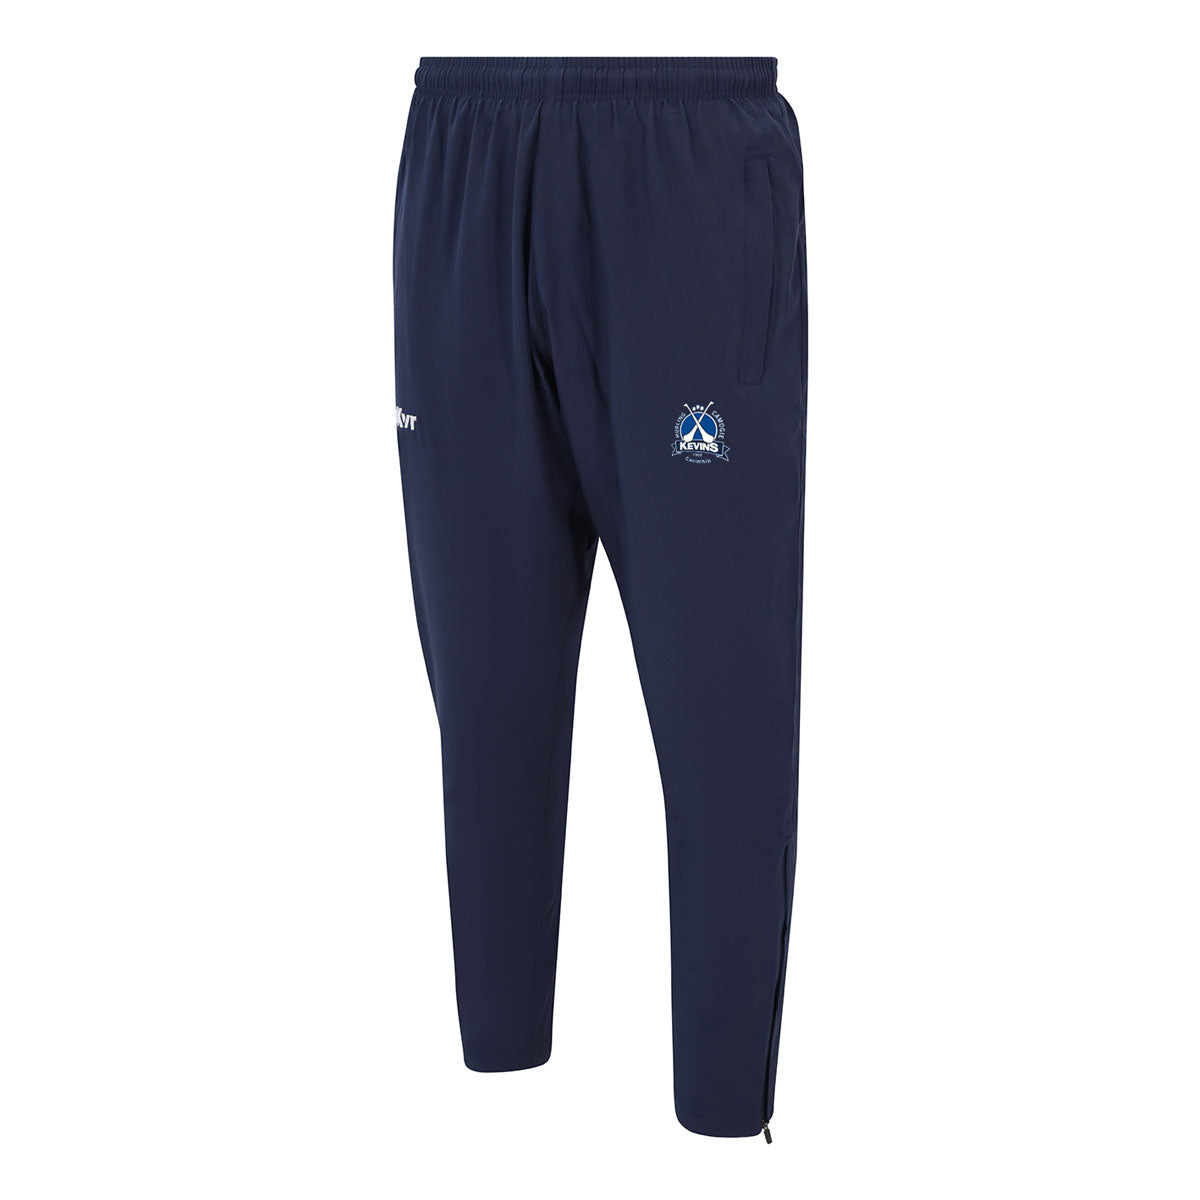 Mc Keever Kevins Hurling & Camogie Dublin Core 22 Tapered Pants - Youth - Navy